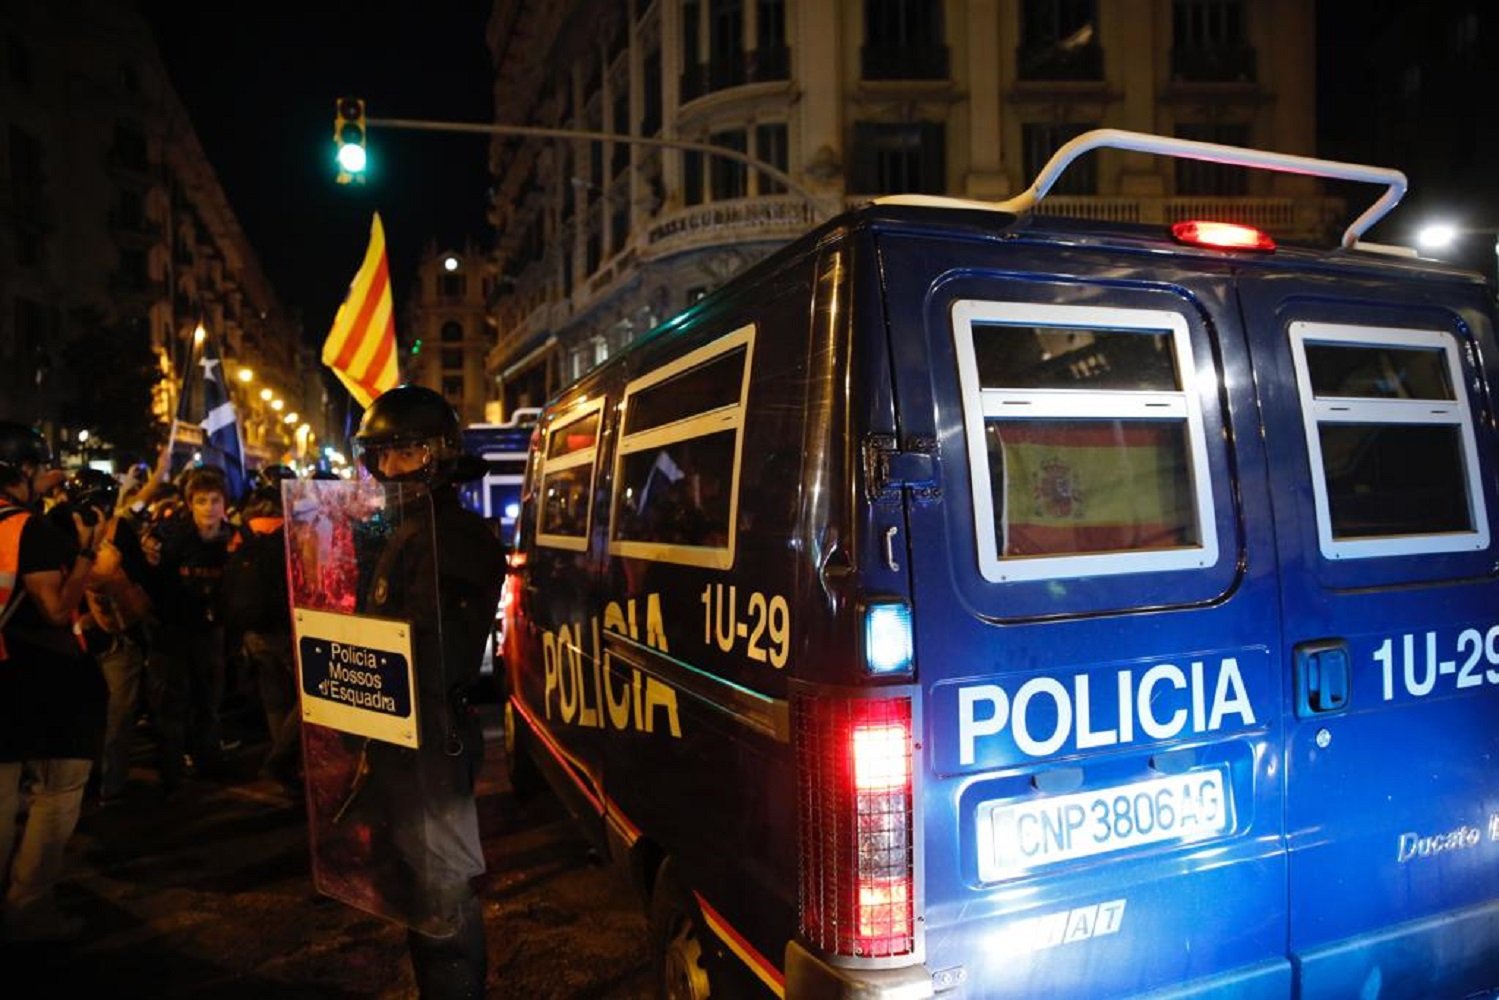 Extra Spanish police to stay in Catalonia until after football classic, says ministry